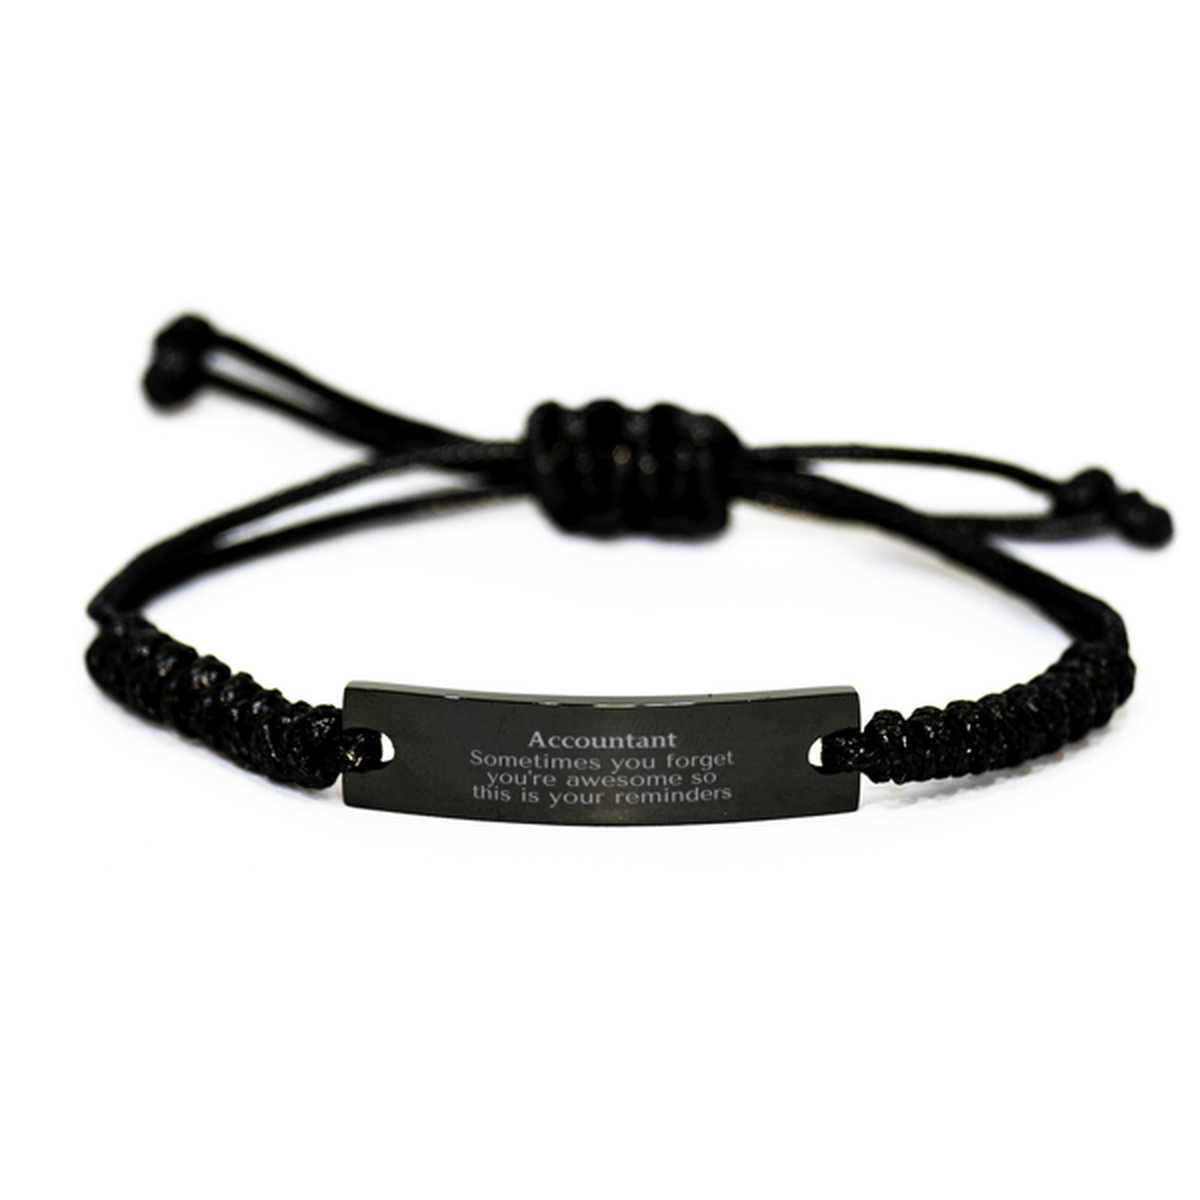 Sentimental Accountant Black Rope Bracelet, Accountant Sometimes you forget you're awesome so this is your reminders, Graduation Christmas Birthday Gifts for Accountant, Men, Women, Coworkers